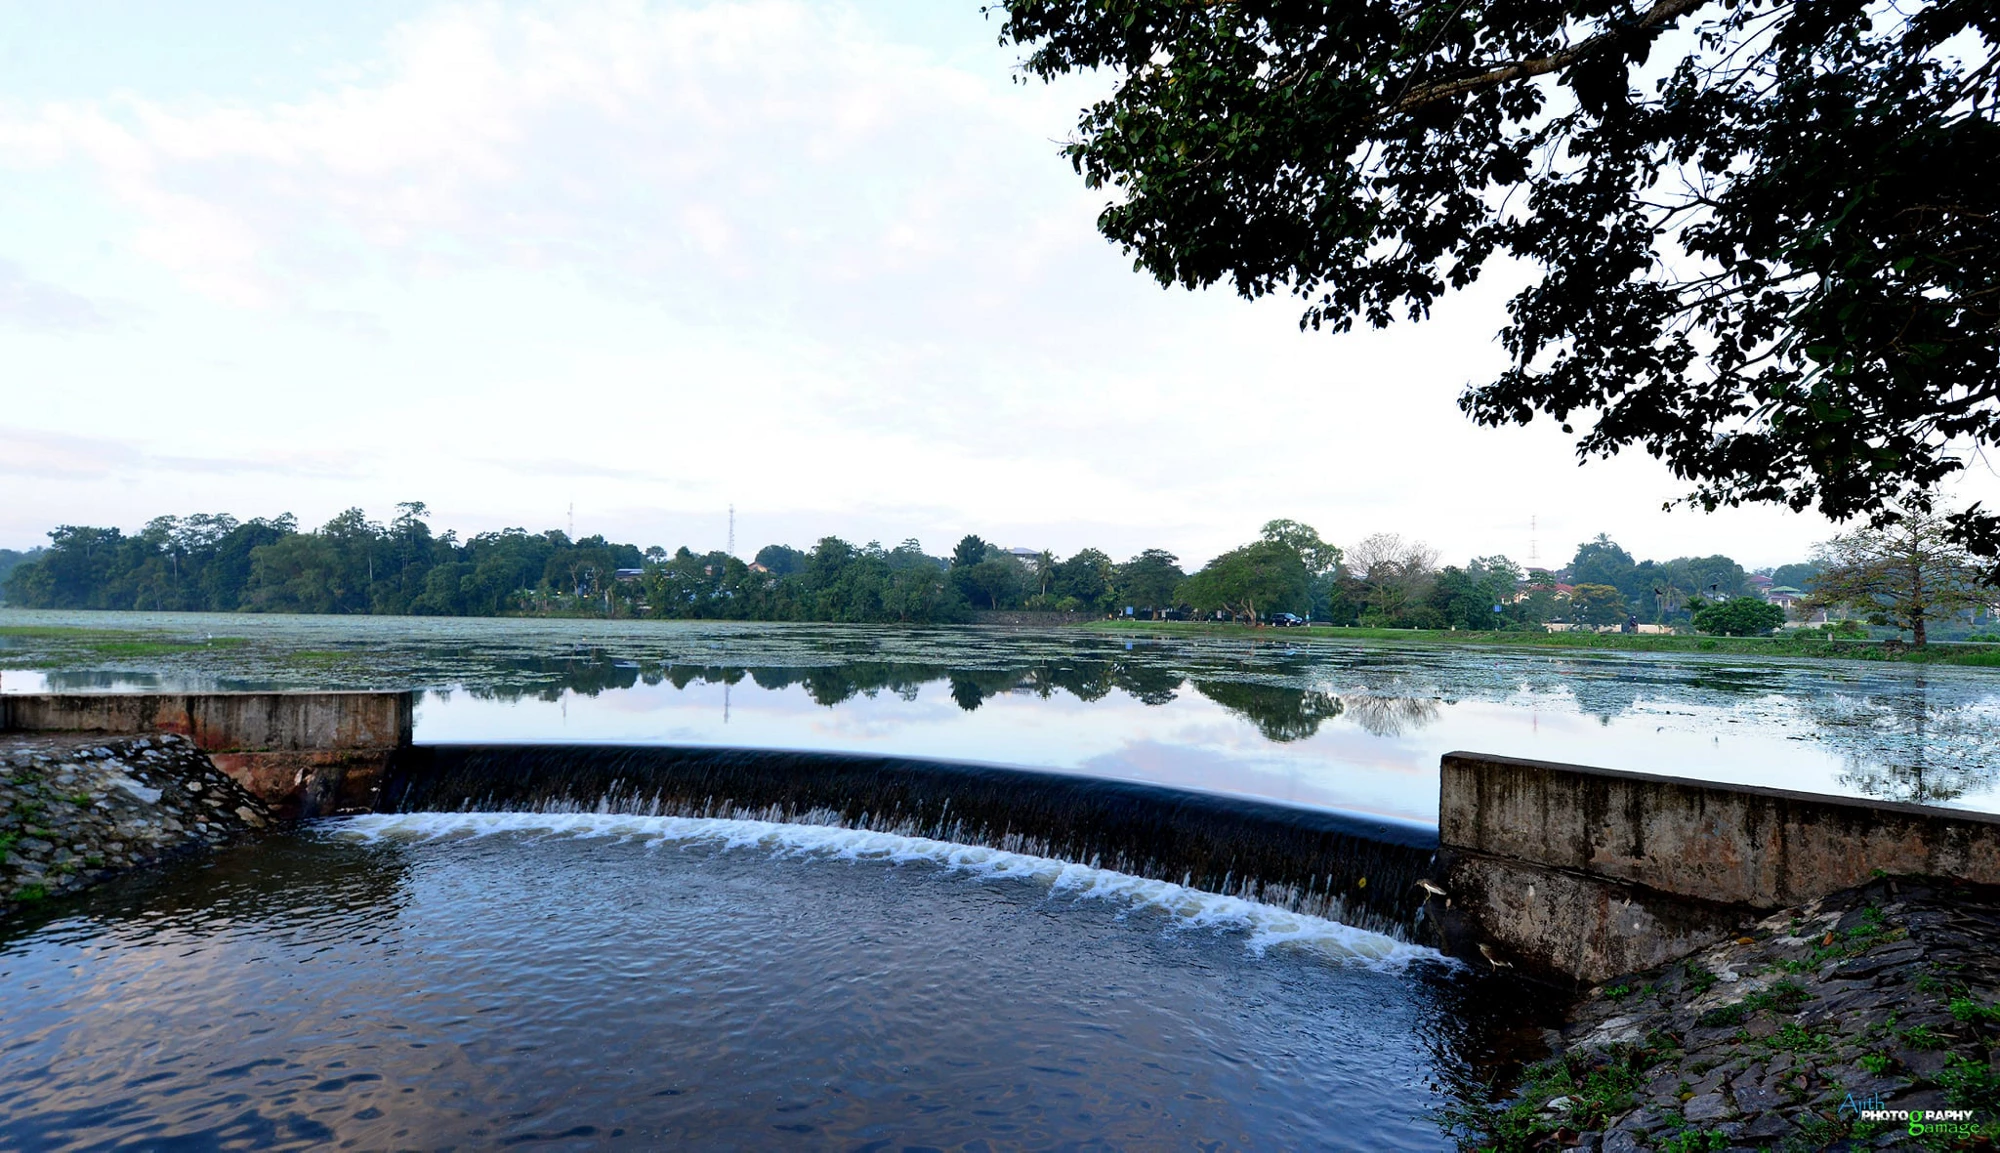 Talangama tank in Srijayawardenapura Kotte is a birding haven for wildlife enthusiasts, a livelihood source for the poor farmers that enables paddy cultivation, and helps divert flood water thus keeping Colombo safe. Photo Credit: Adjith Gamage